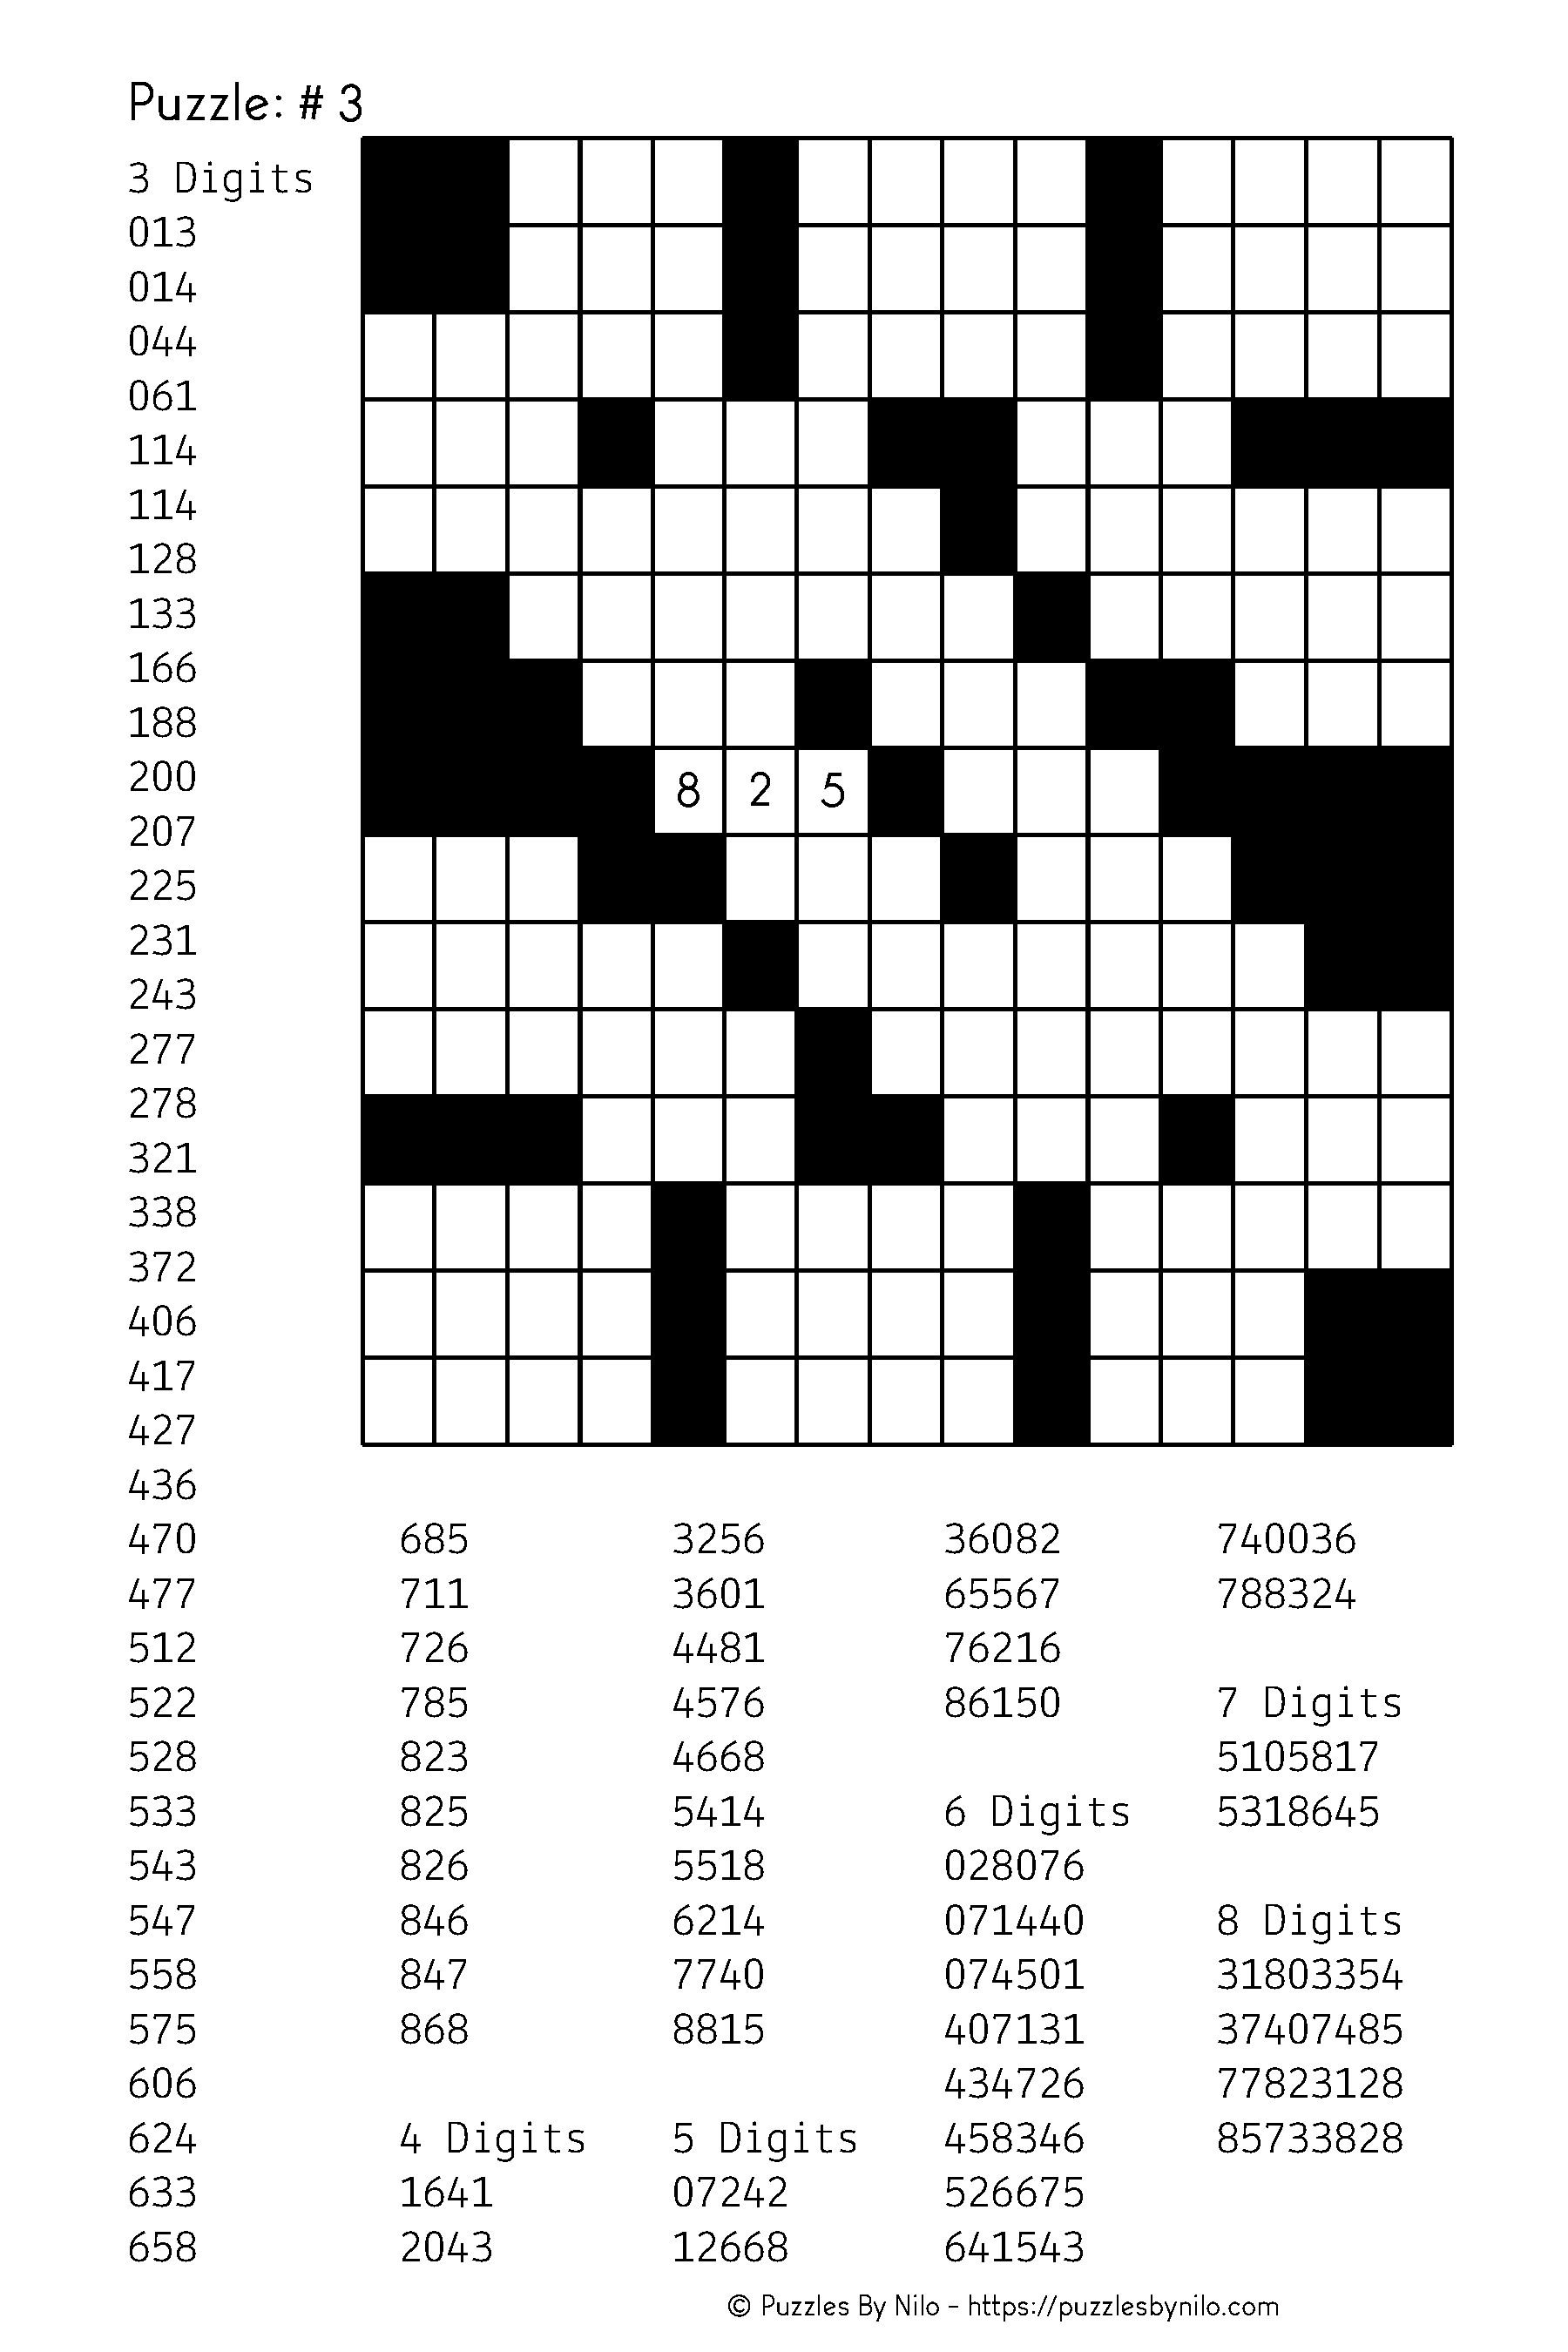 Get Your Free Puzzle Here! - Https://goo.gl/hxpjtw | Math Ideas - Https Printable Crossword Puzzles